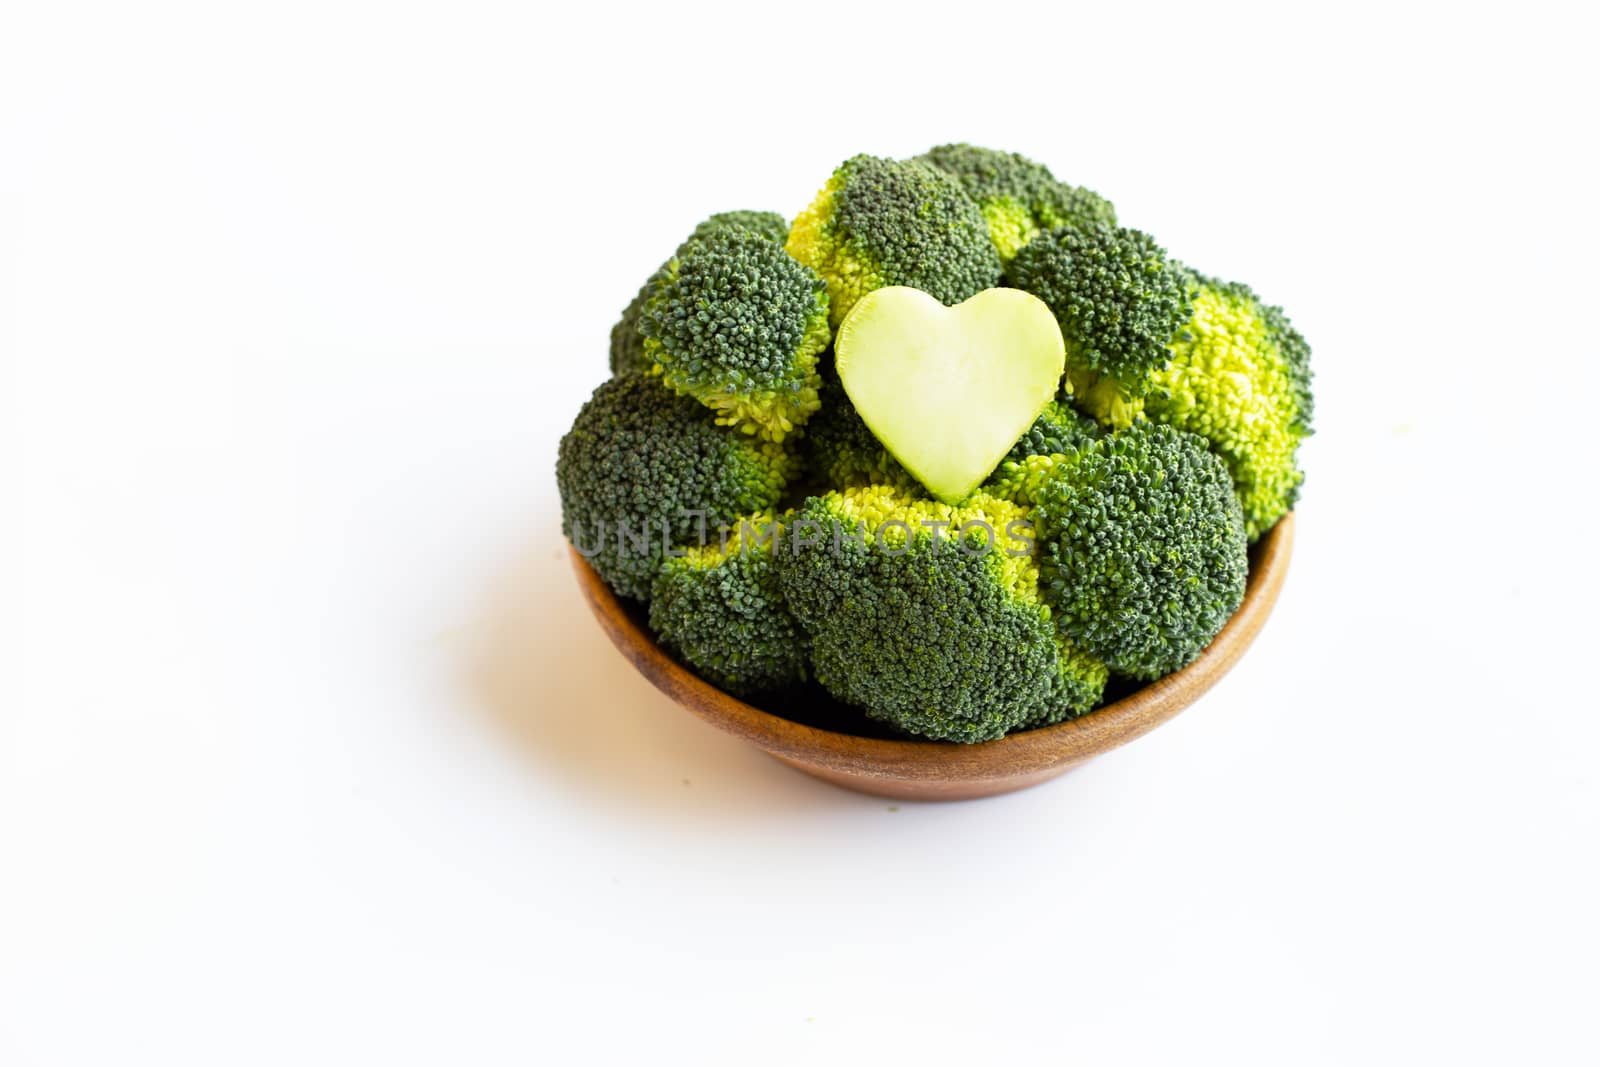 Broccoli in wooden bowl on white by Bowonpat